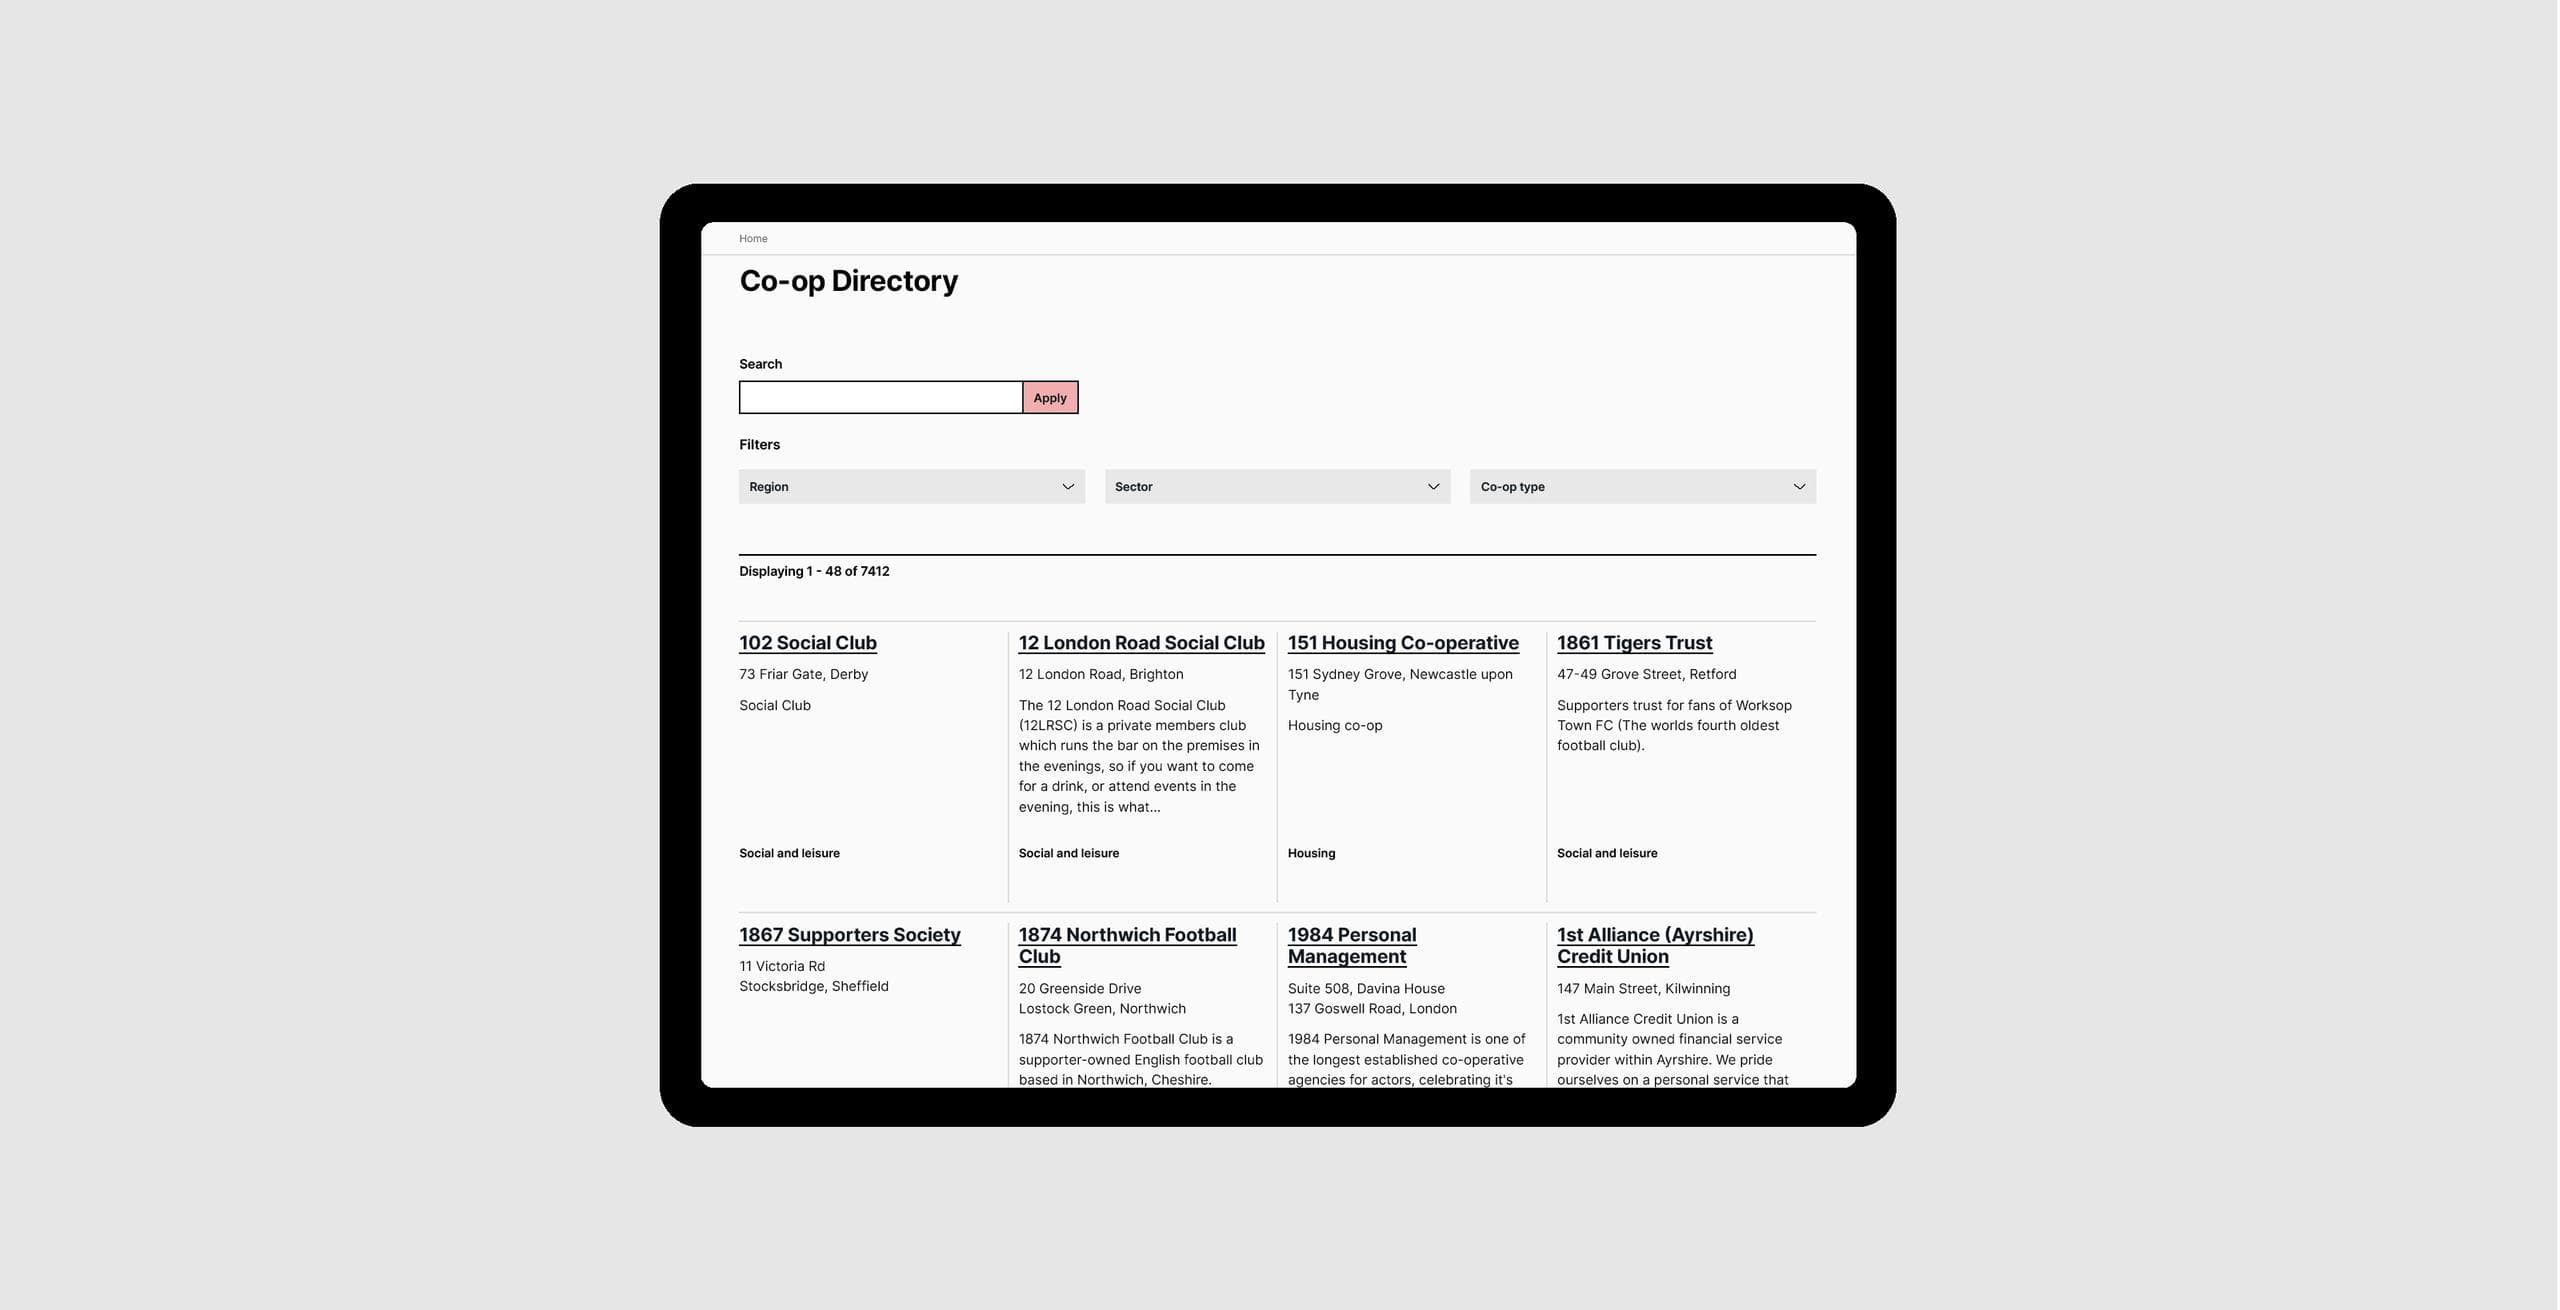 The co-op directory listing page